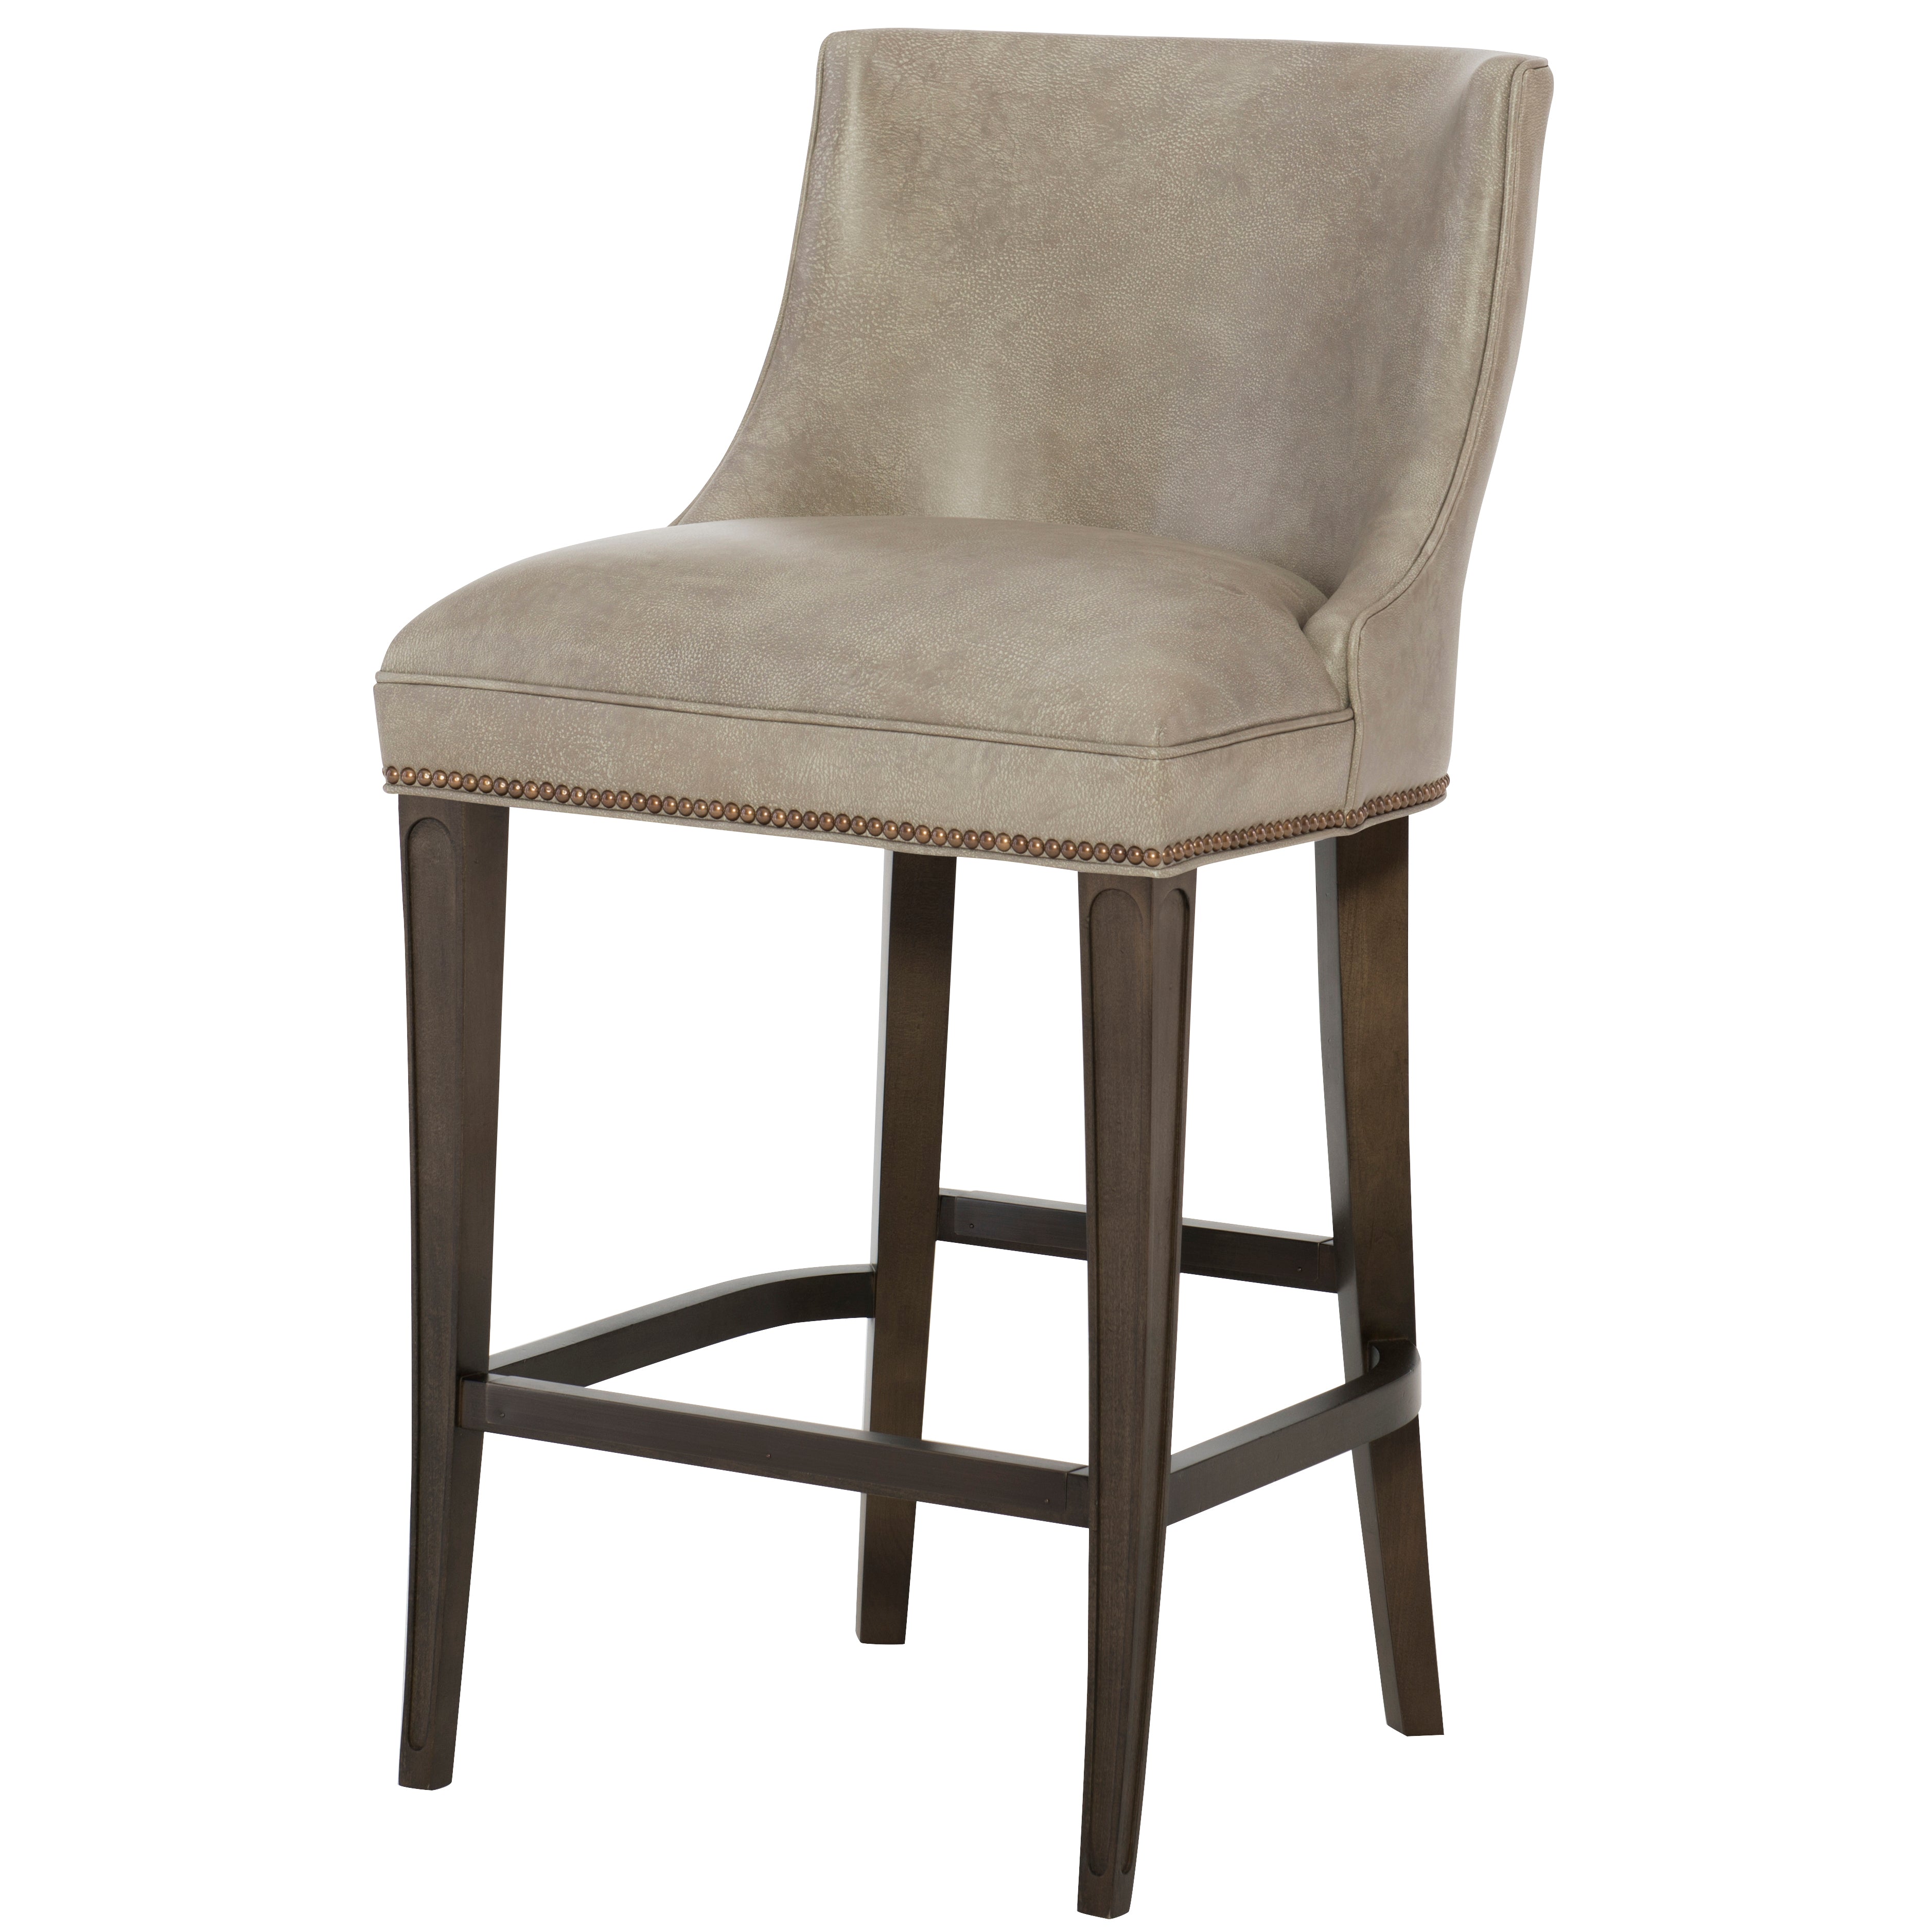 Errol Leather Bar Stool in Mont Blanc Mist leather by Wesley Hall